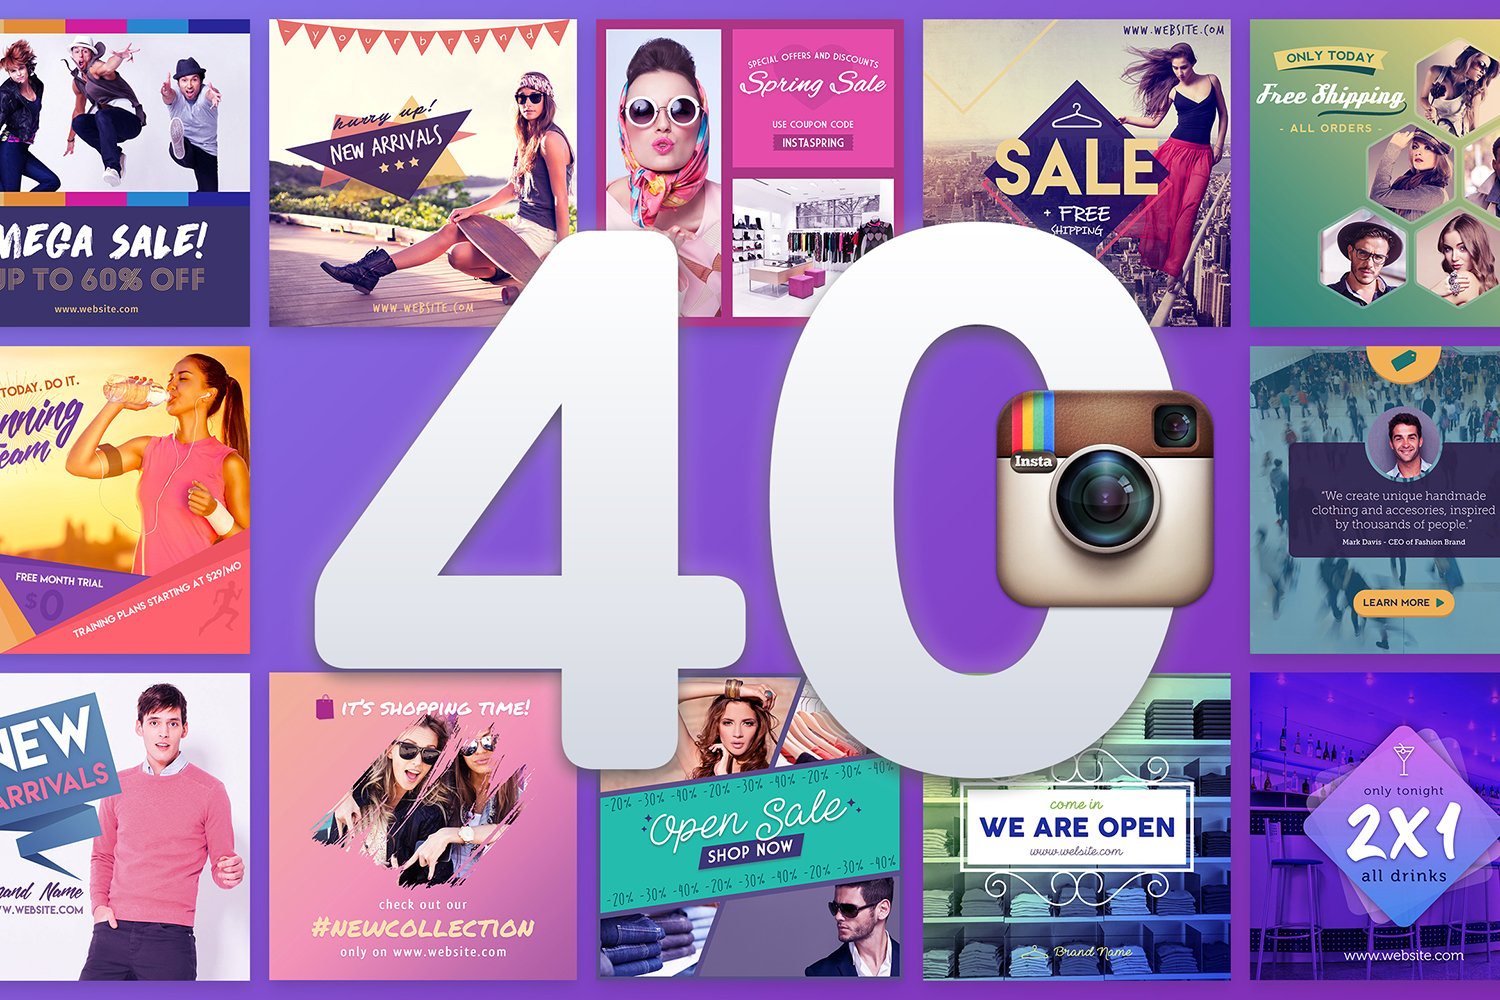 Instagram Promotional Banners